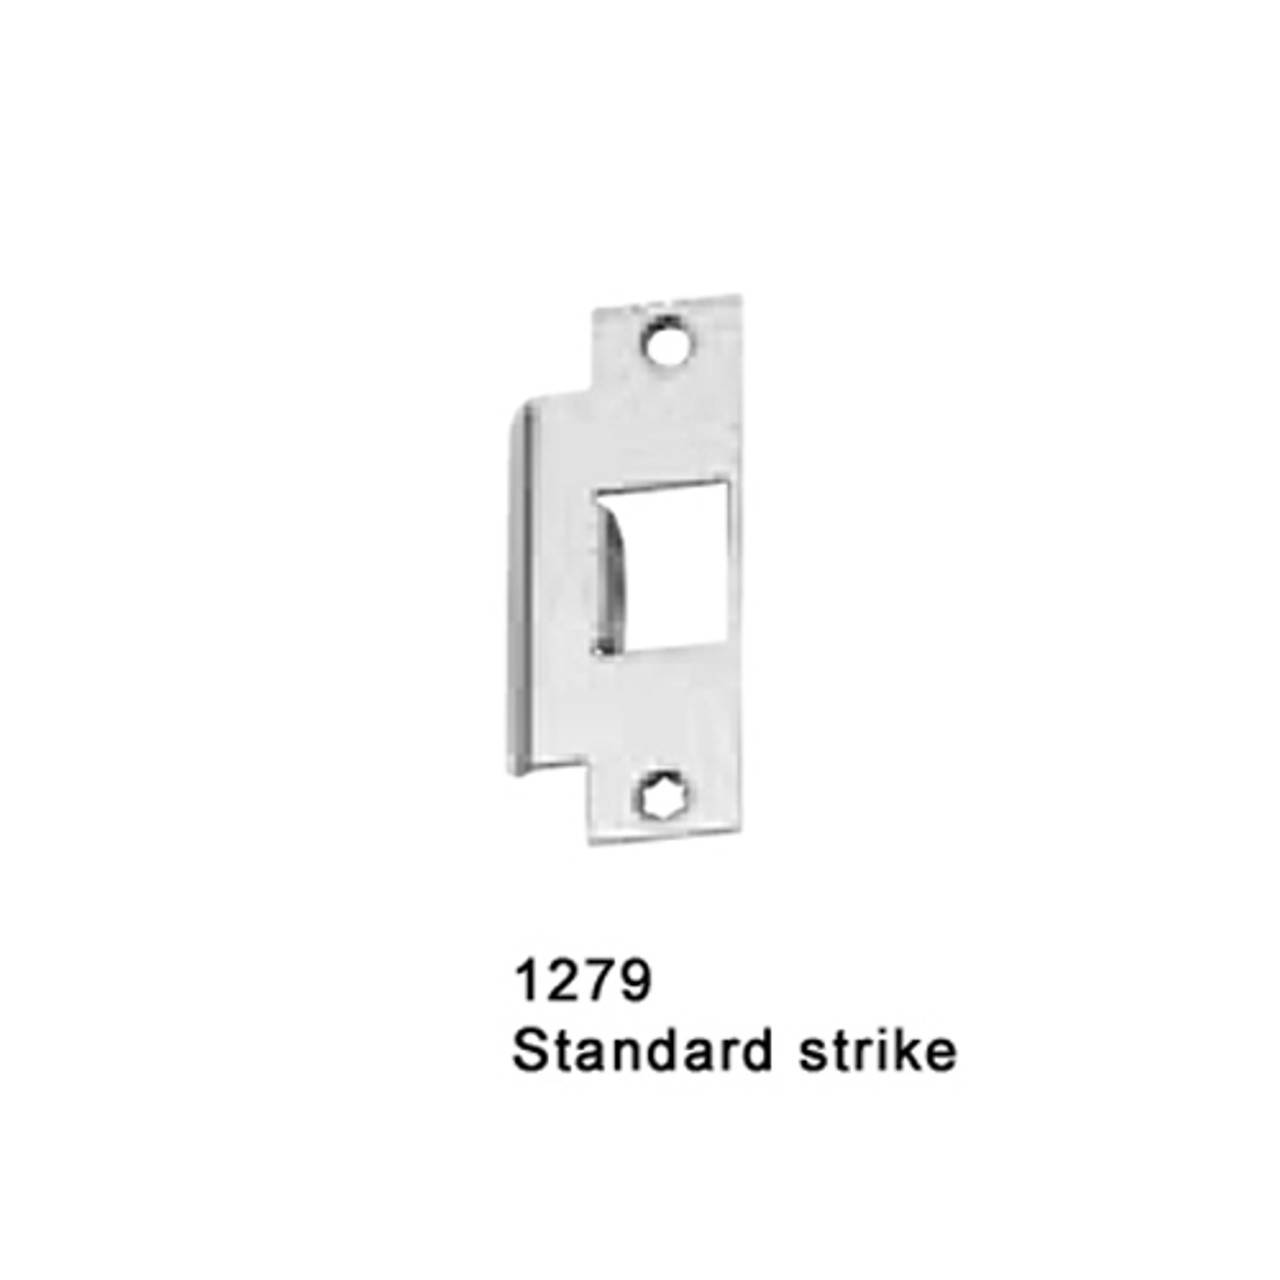 CD25-M-TP-US10-4-LHR Falcon 25 Series Mortise Lock Devices with 512TP Thumbpiece Trim in Satin Bronze